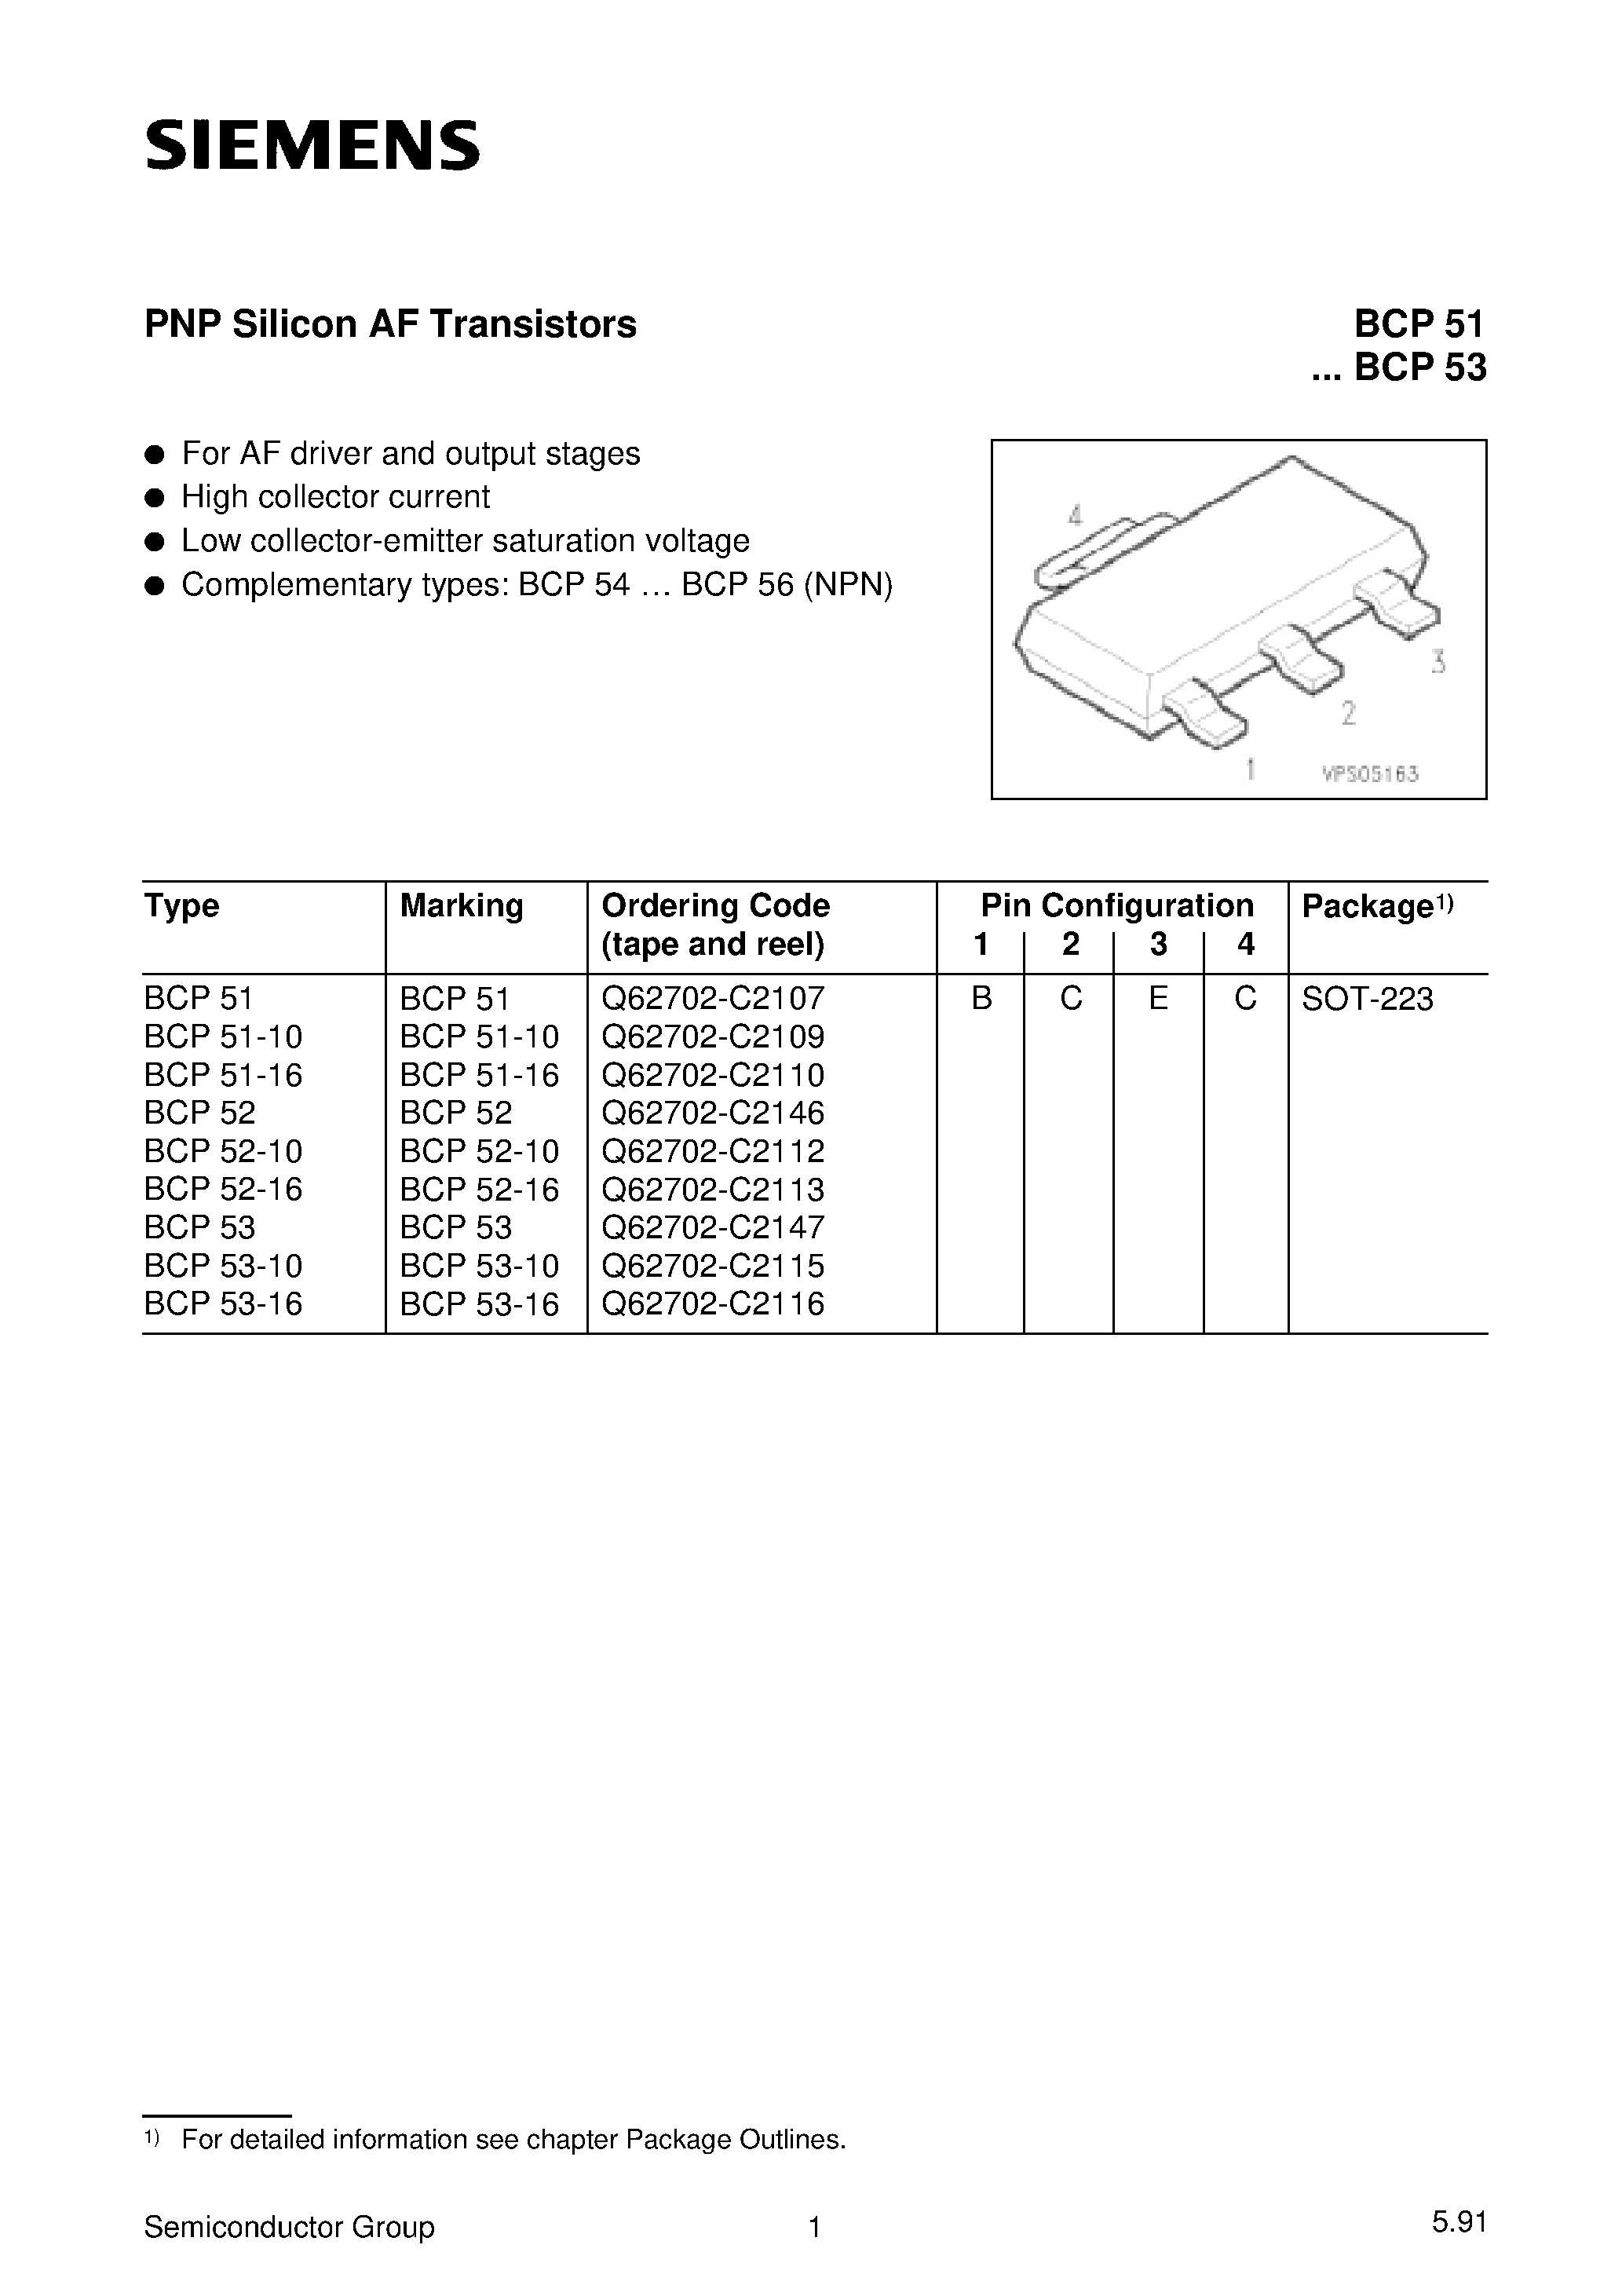 Datasheet BCP53-16 - PNP Silicon AF Transistors (For AF driver and output stages High collector current) page 1